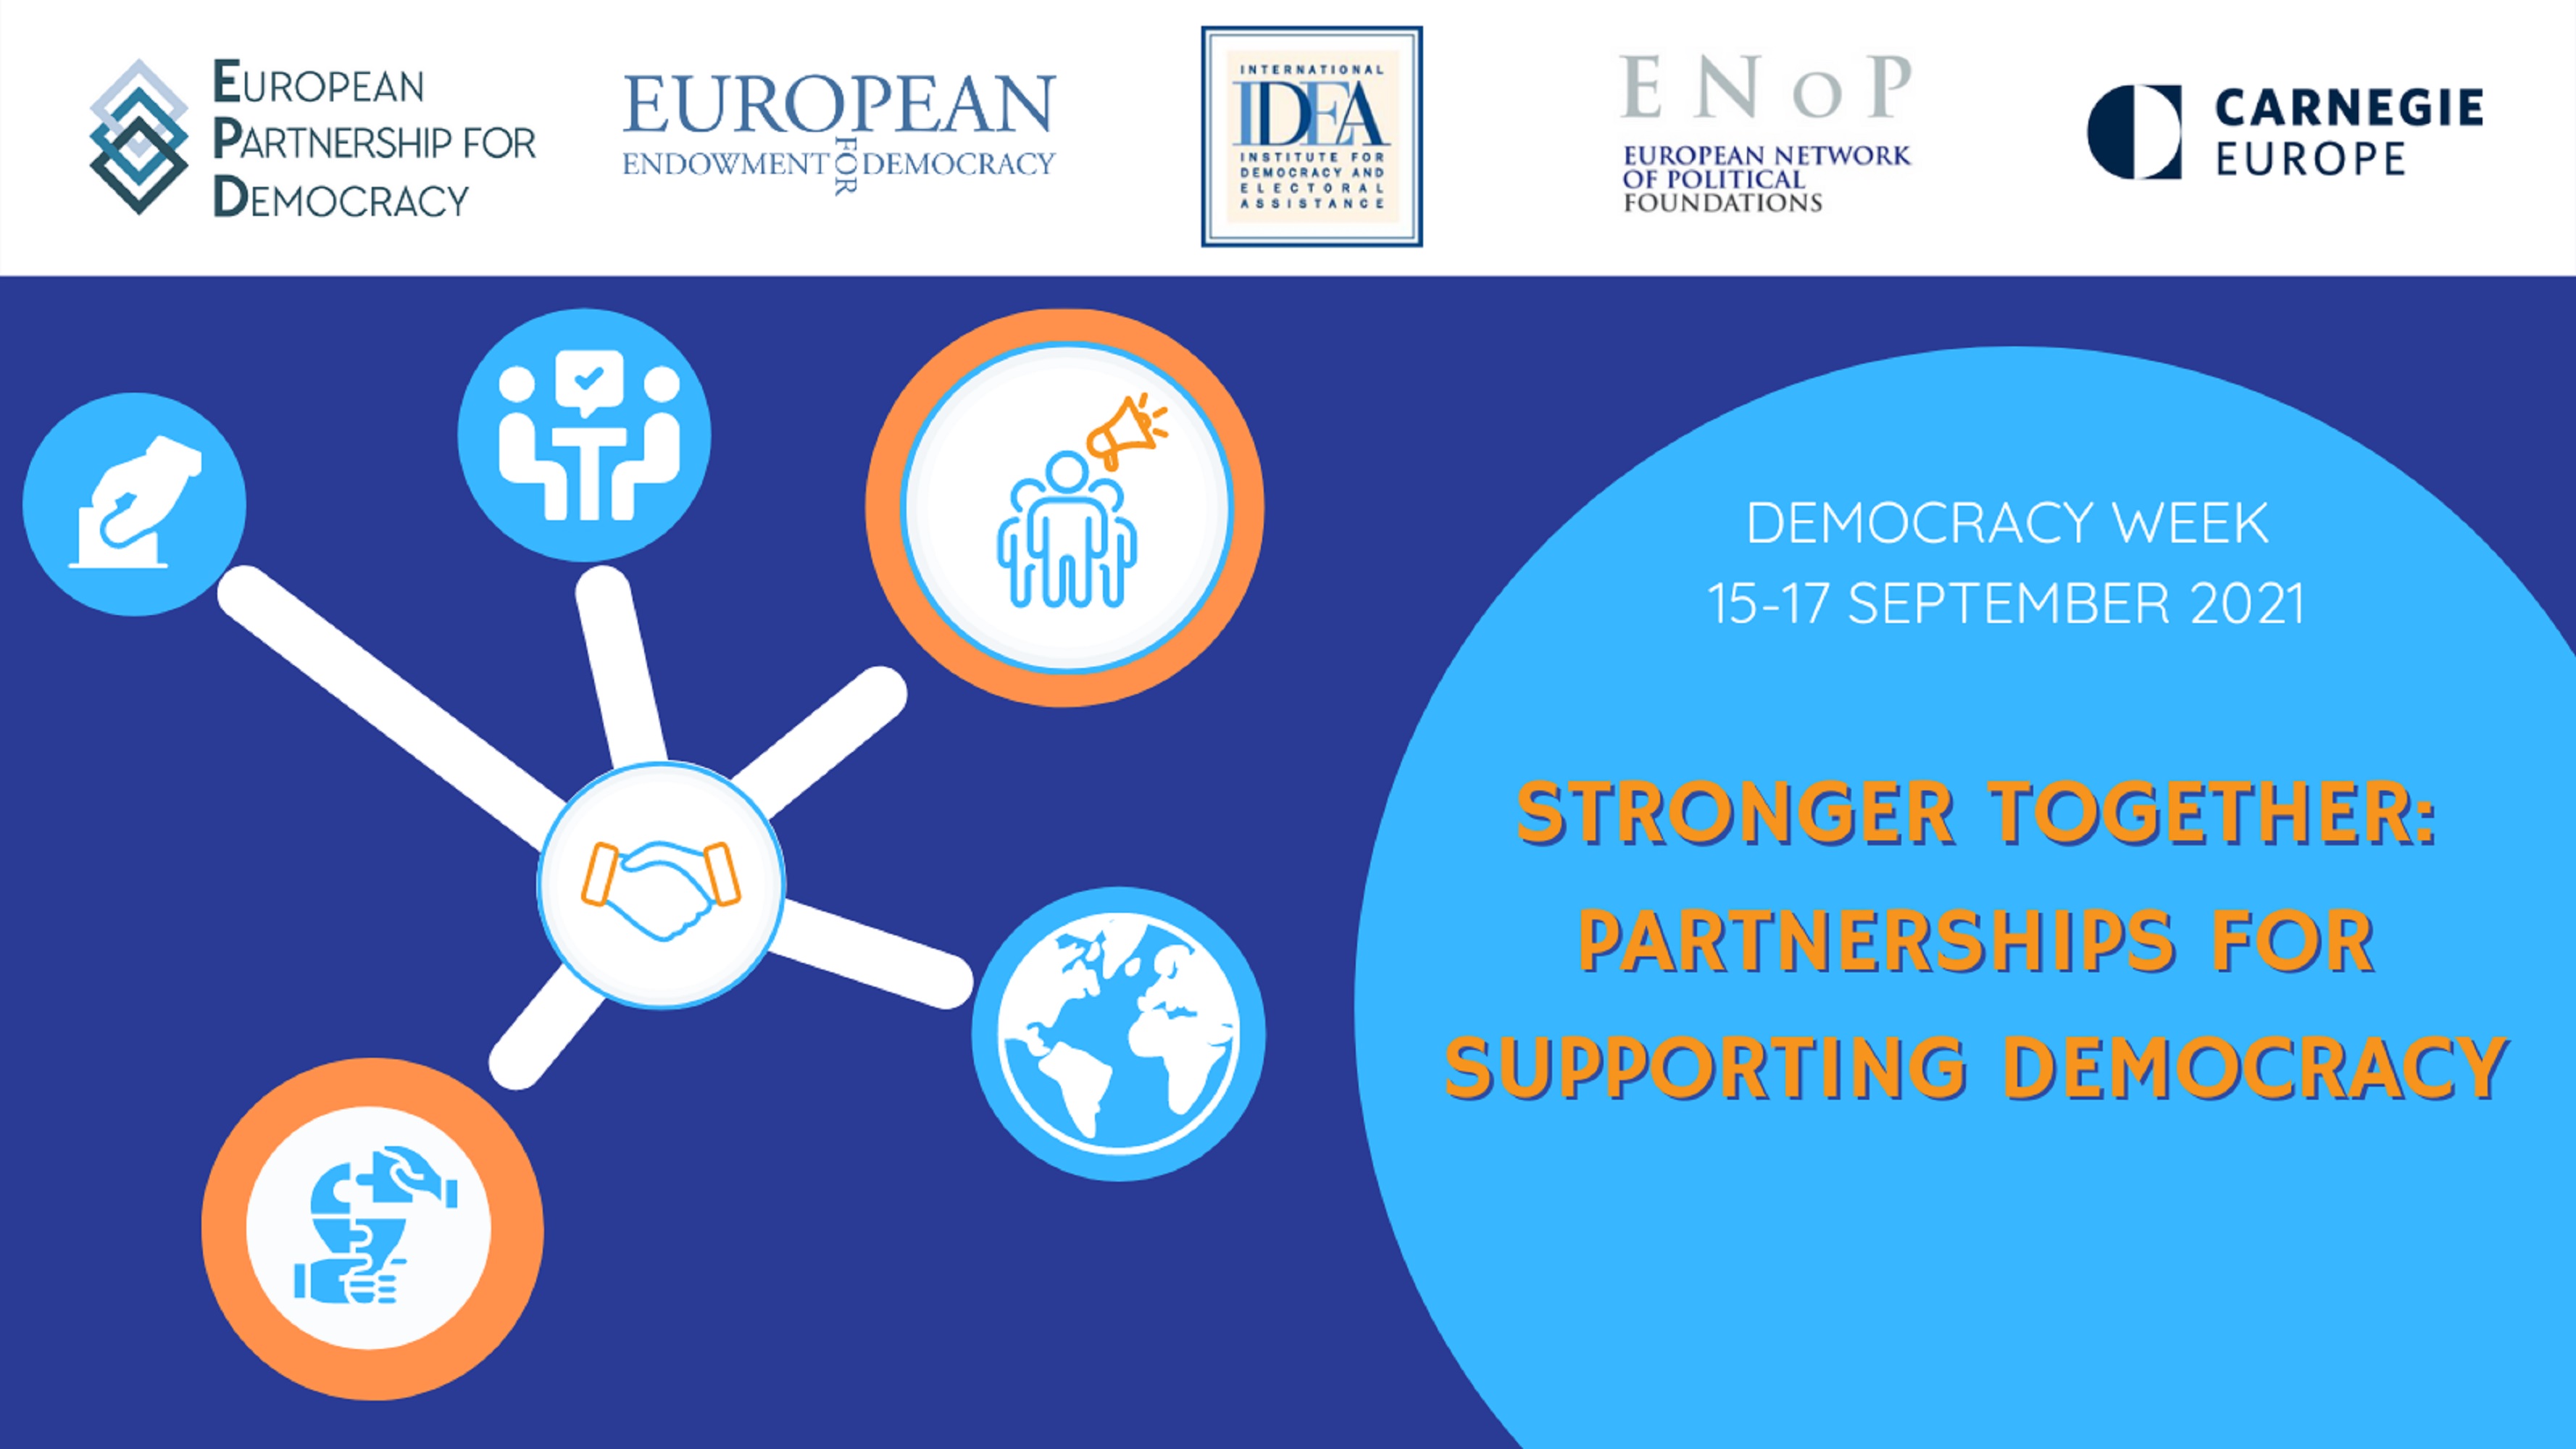 HUMAN RIGHTS-BASED APPROACH: THE EU TOOLBOX FOR PLACING RIGHTS-HOLDERS AT THE CENTRE OF INTERNATIONAL PARTNERSHIPS